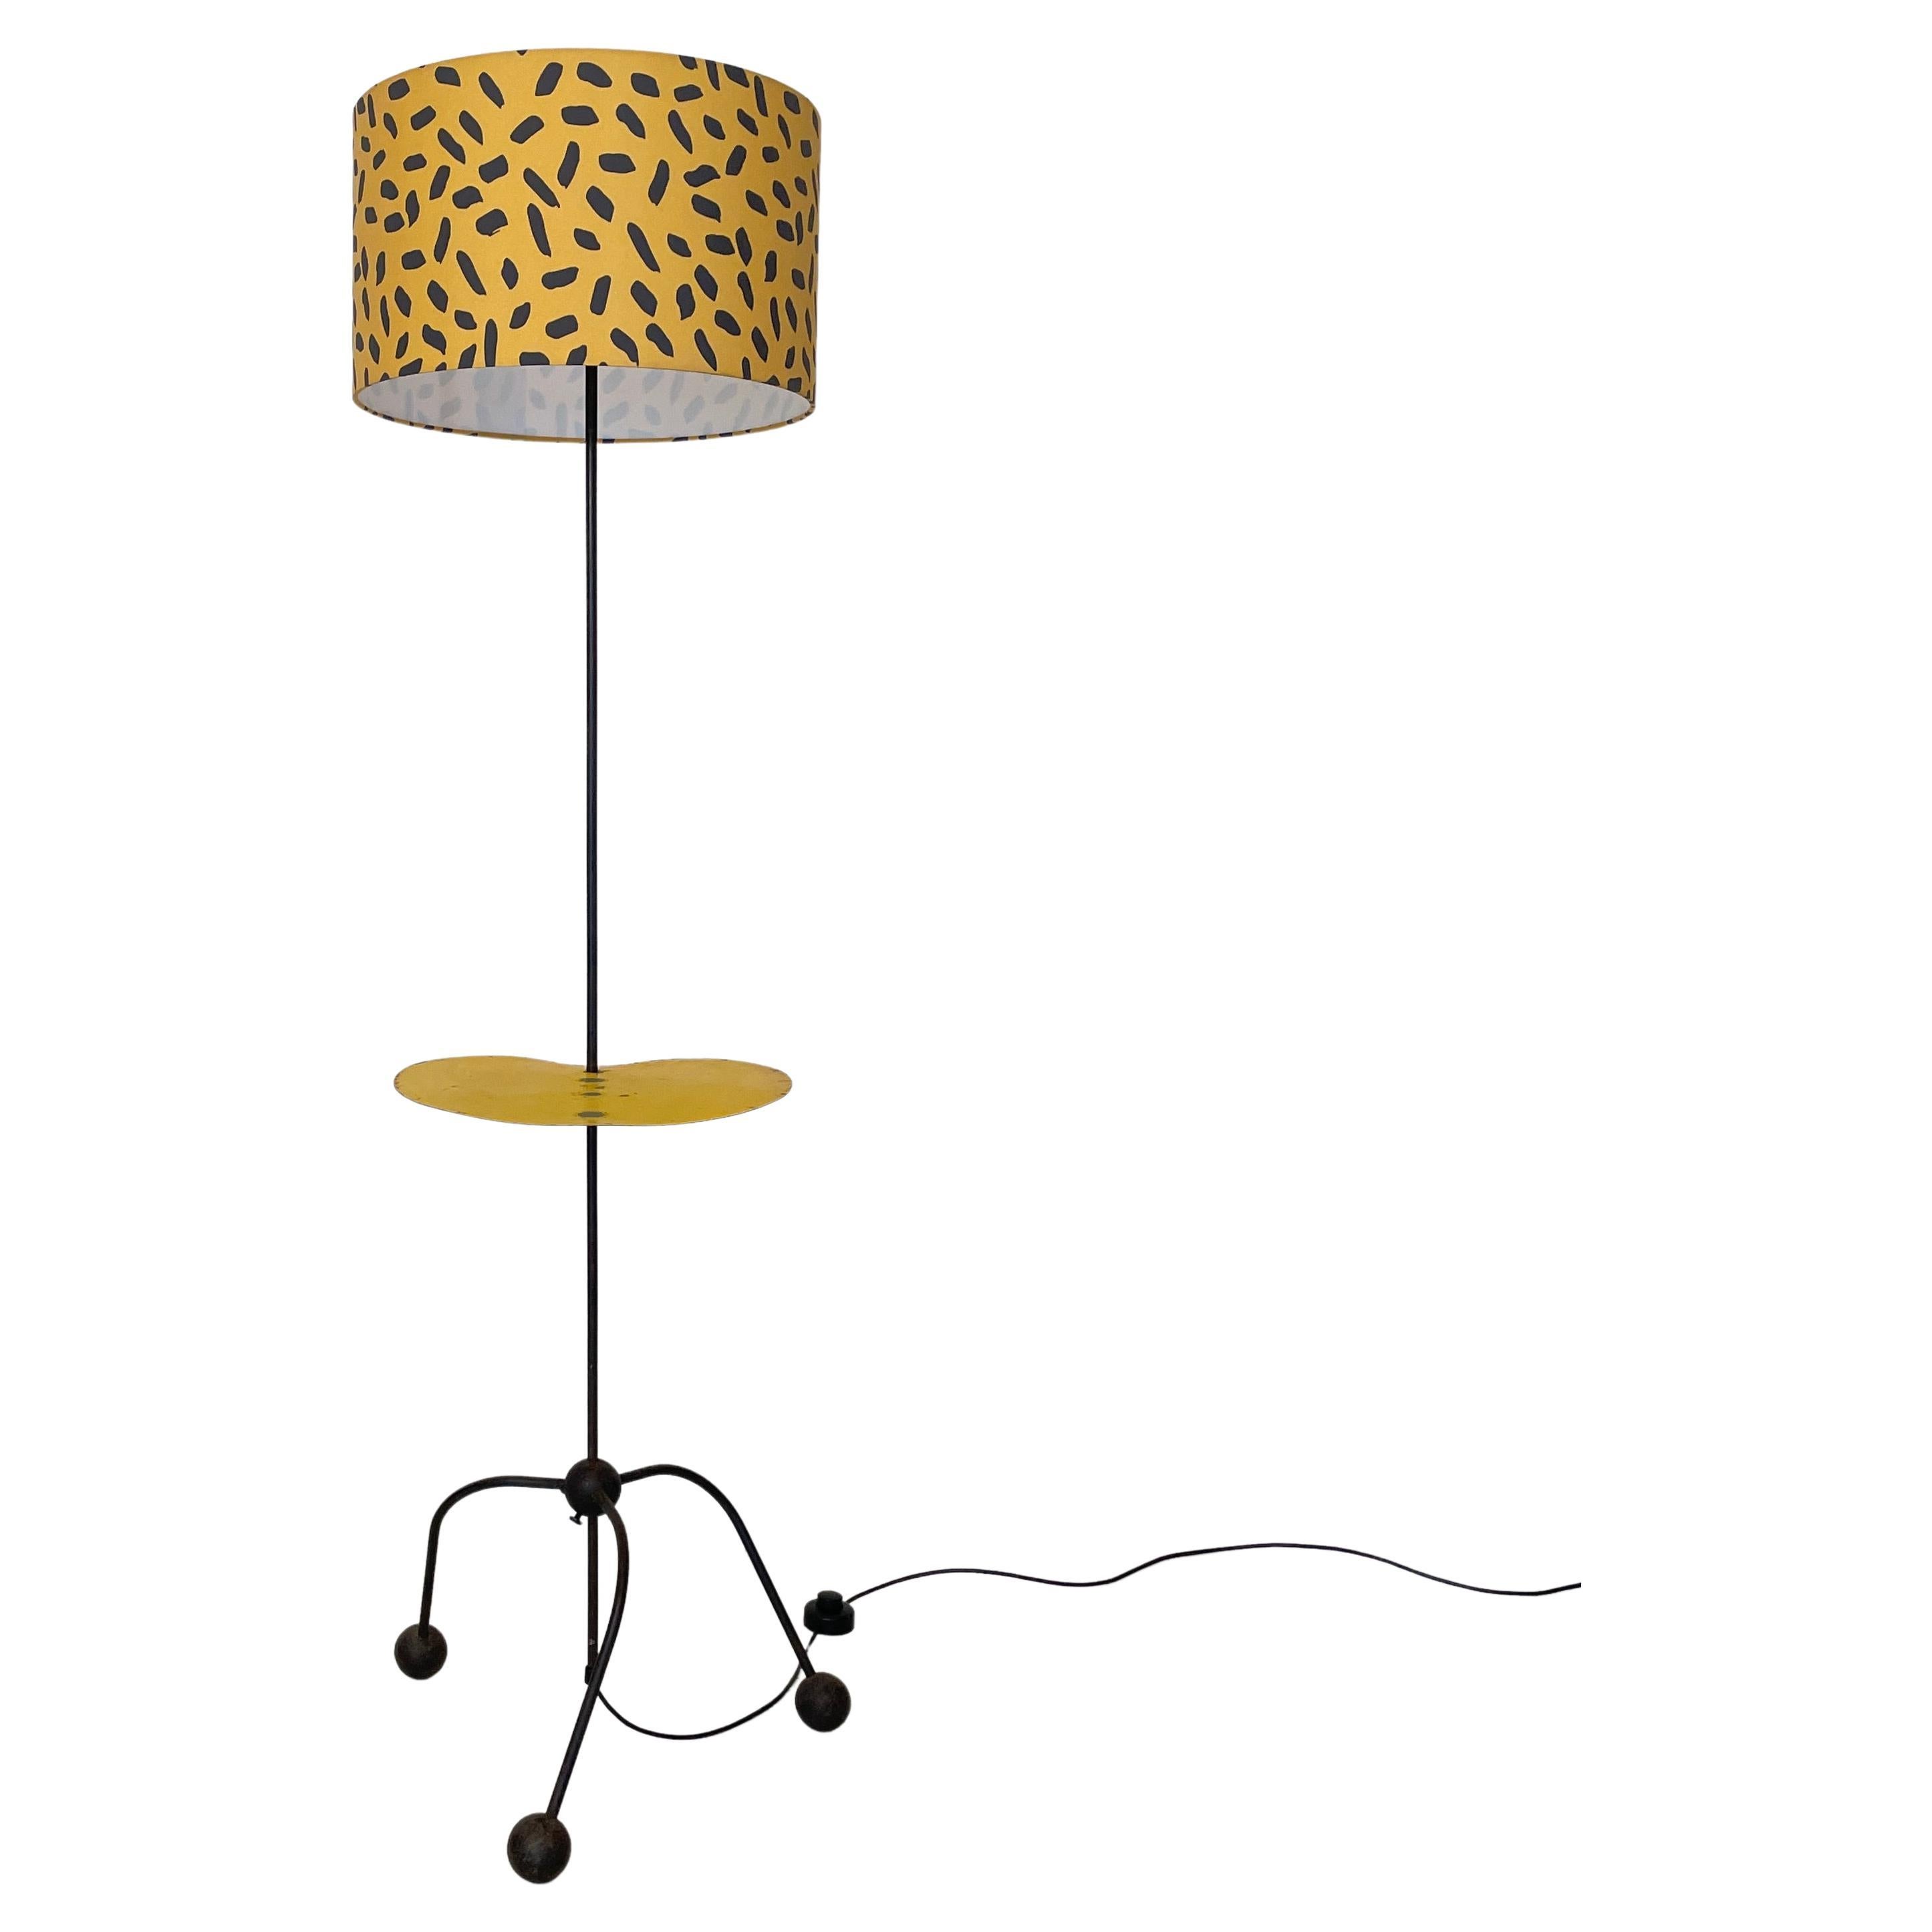 Mid-Century French Floor Lamp Made of Black Metal with Yellow Fabric Shade, 1950 For Sale